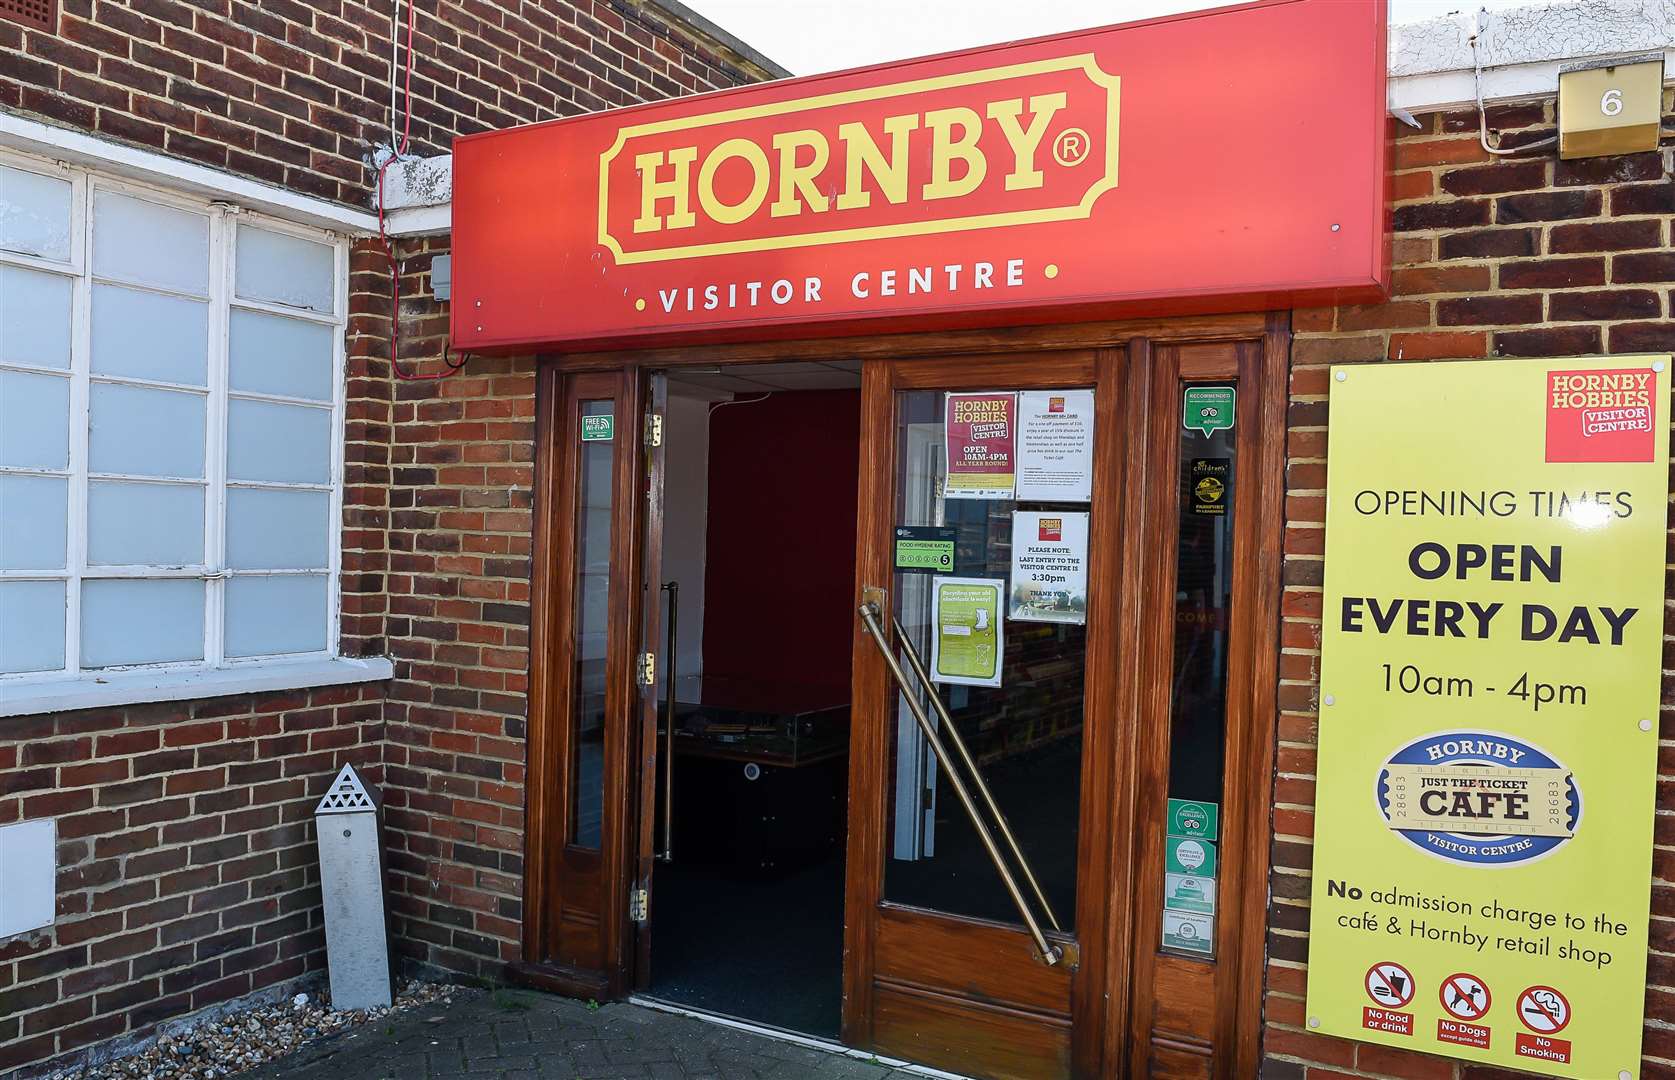 Hornby is based in Margate, next door to its popular visitor centre